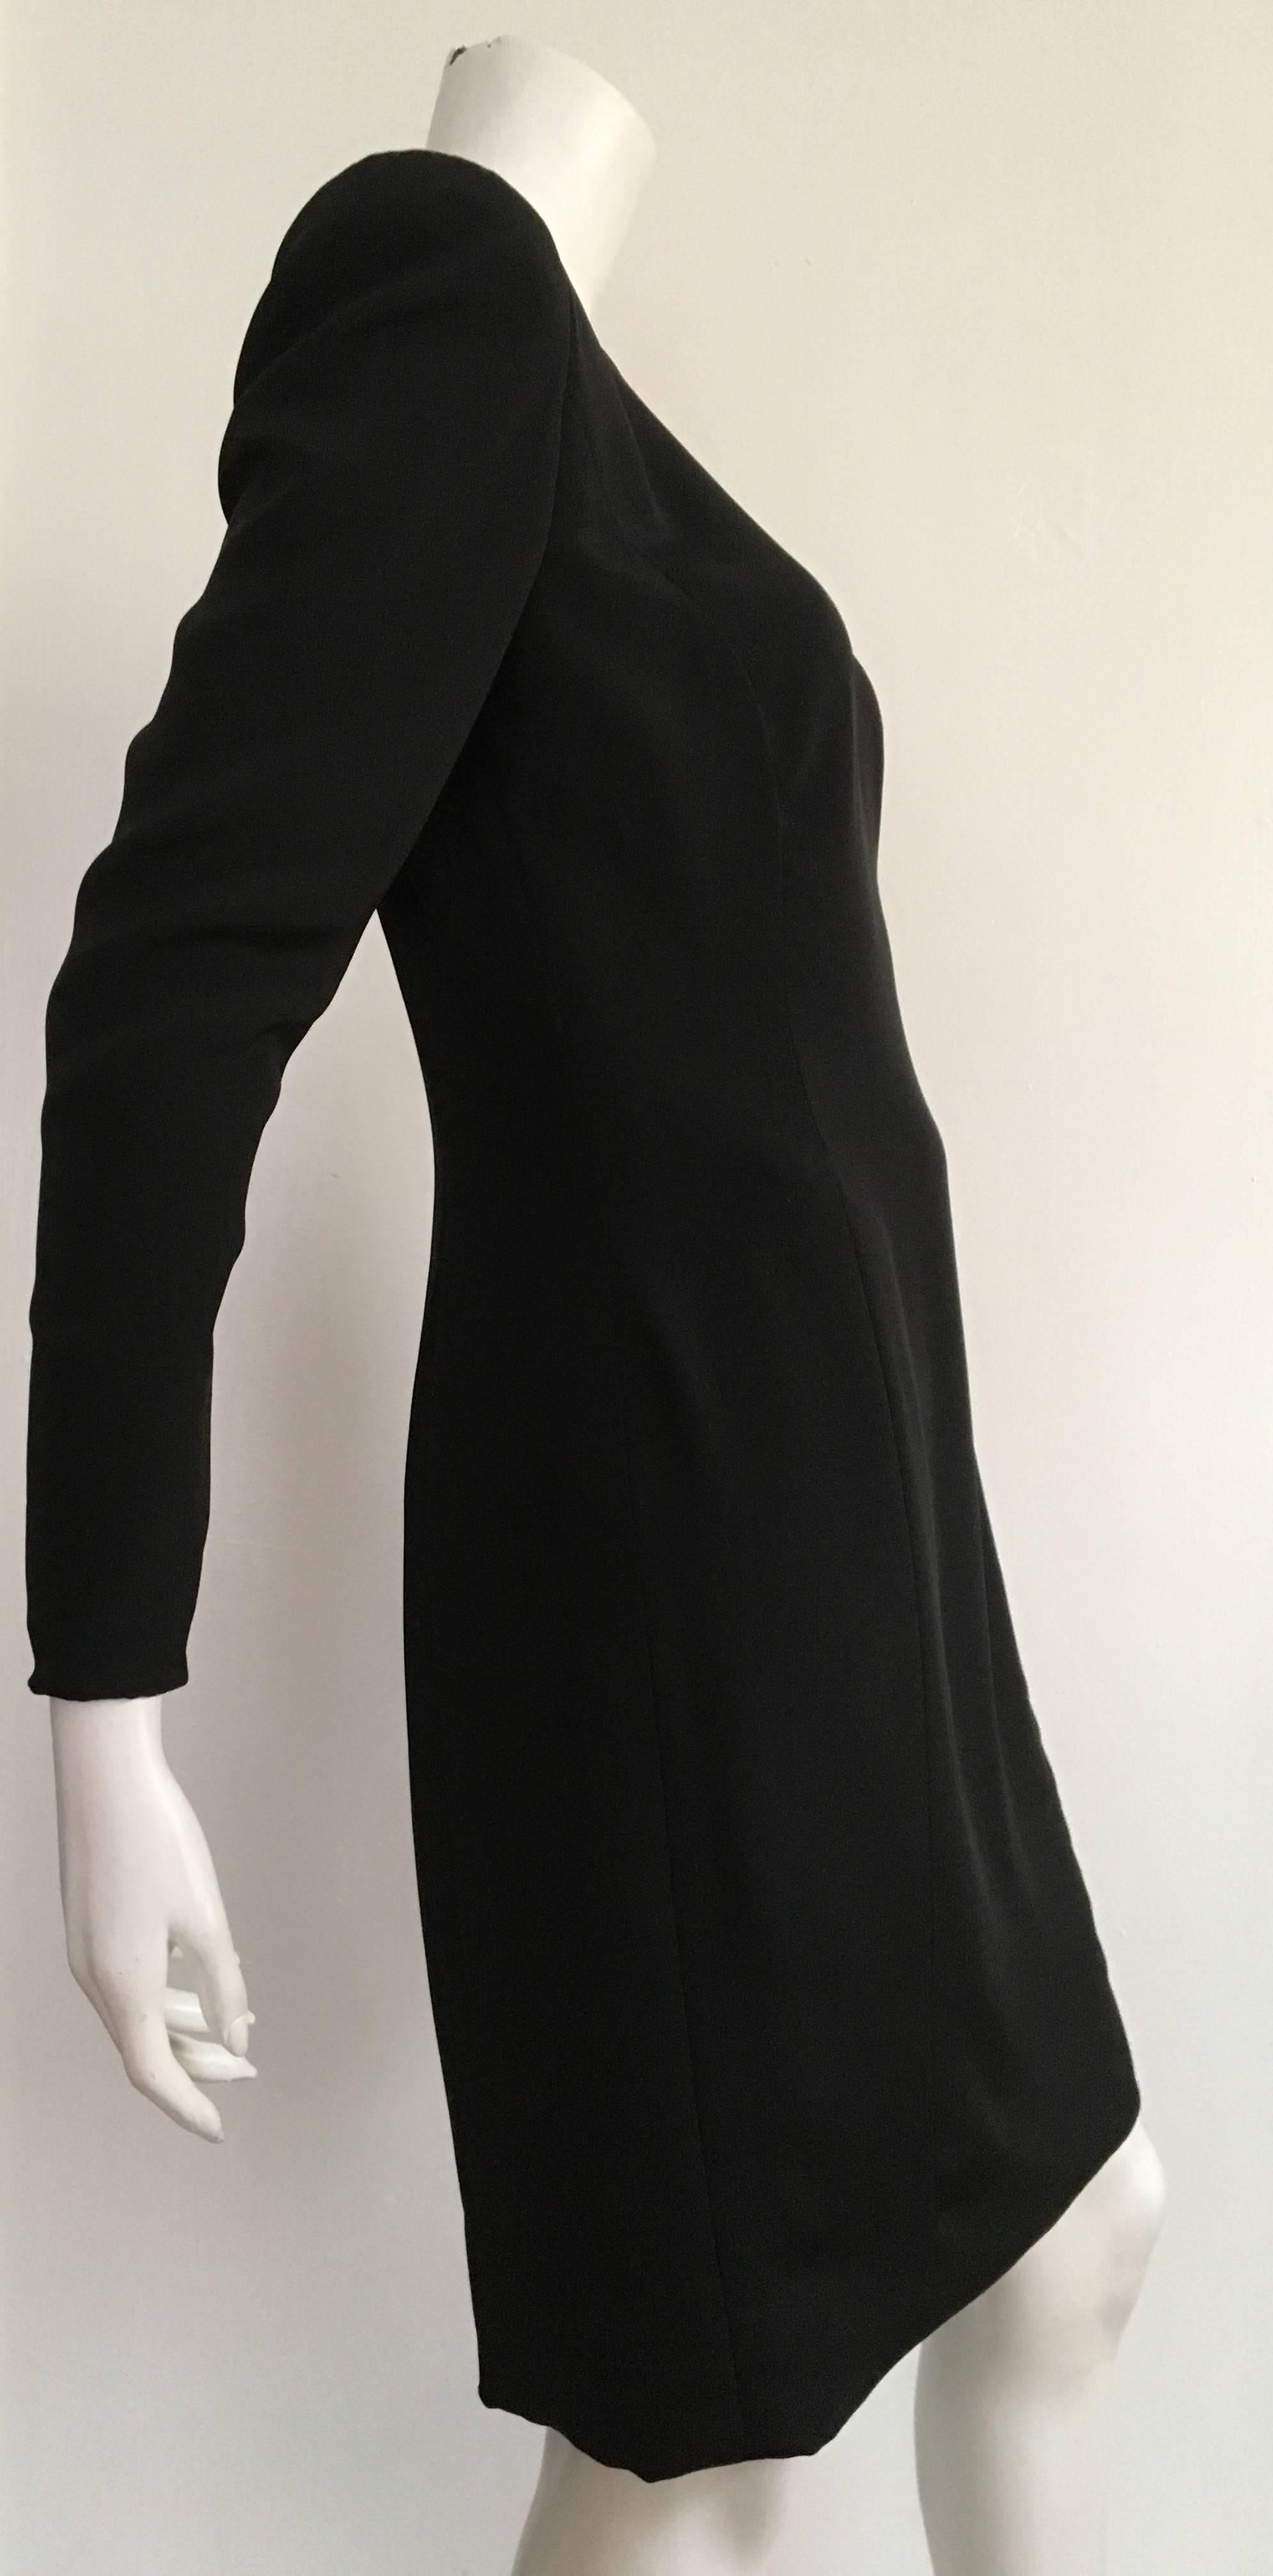 Carolina Herrera 1990s black silk sheath dress size 6.  Please see & use the measurements below so that you can properly measure your lovely body. Classic & stylish LBD is lined with zippers on both sleeves. Mild shoulder pads.
Measurements